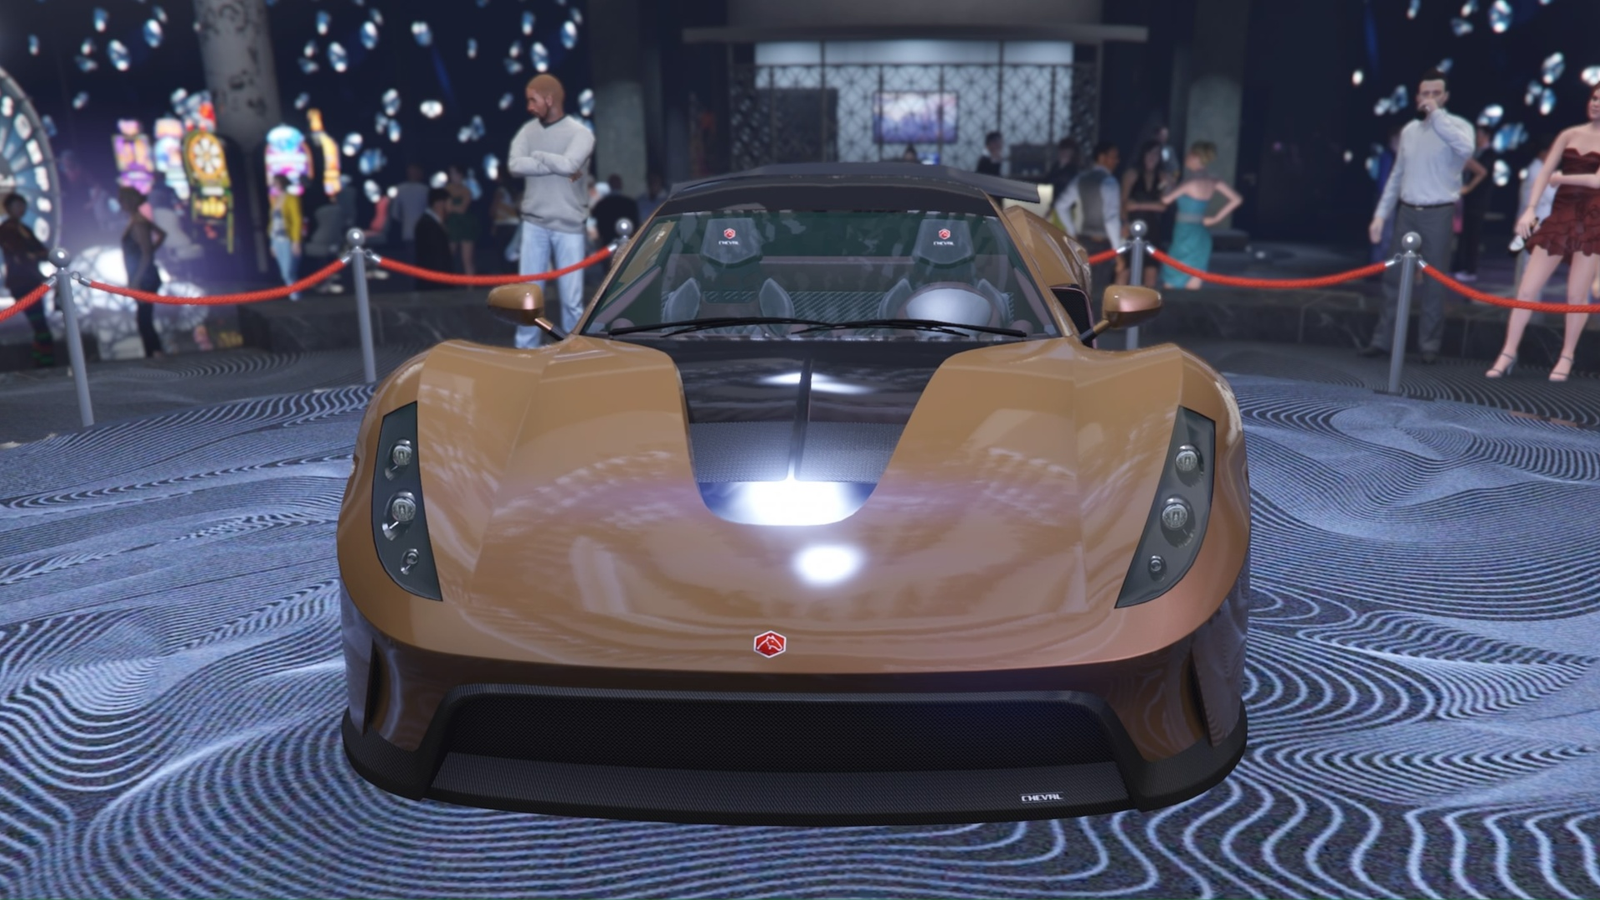 Gta 5 Online How To Claim Free 1 Million Dollars Every Month After